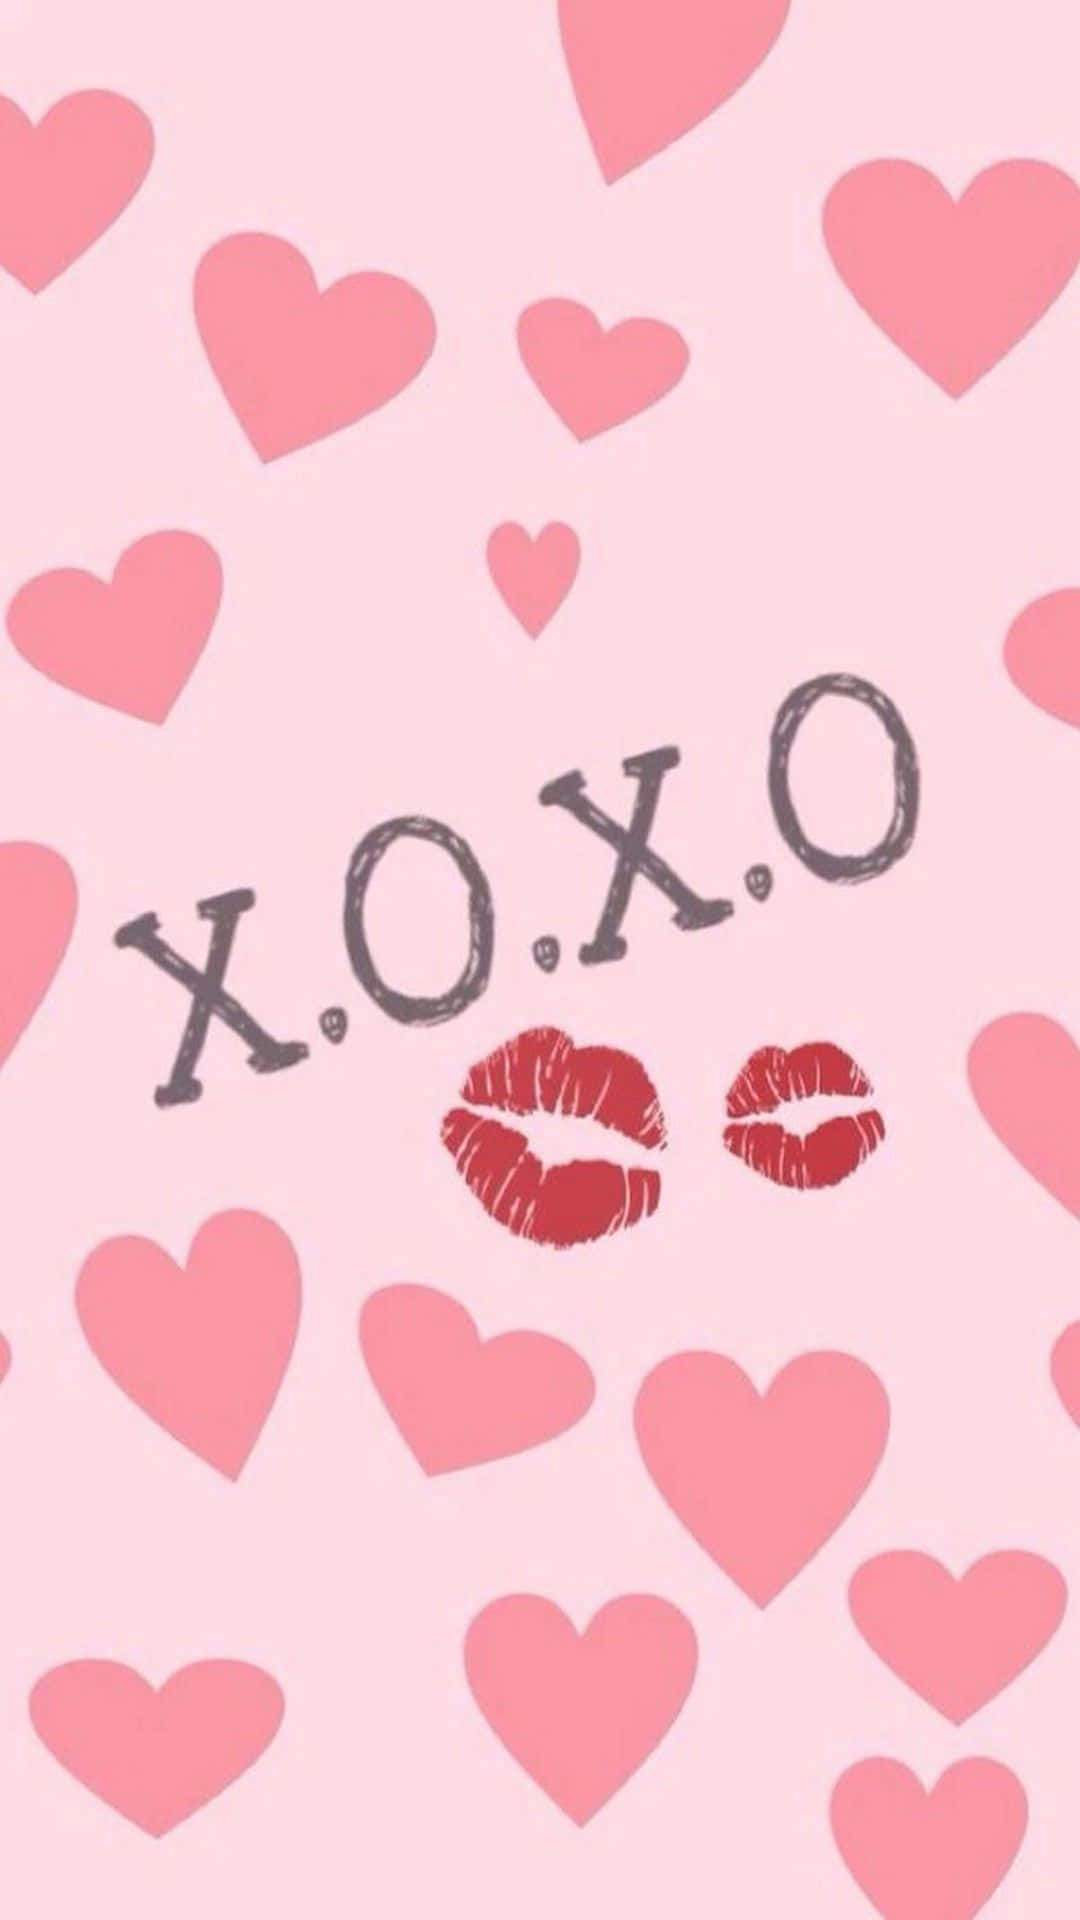 Download Valentine's Day Phone Xoxo Kiss Wallpaper | Wallpapers.com